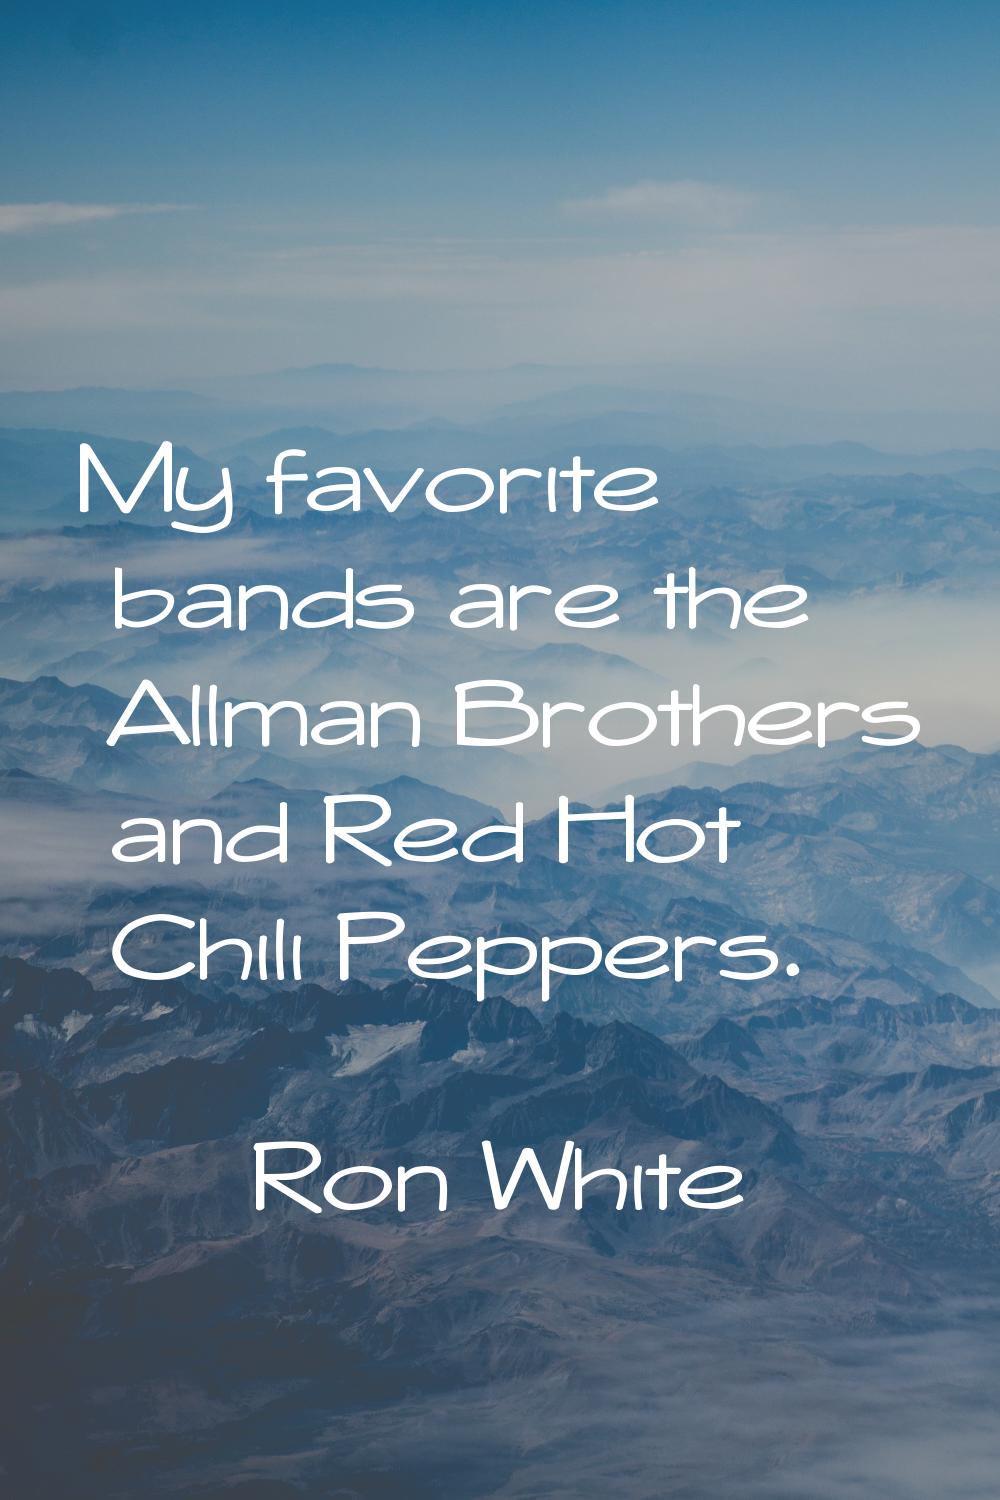 My favorite bands are the Allman Brothers and Red Hot Chili Peppers.